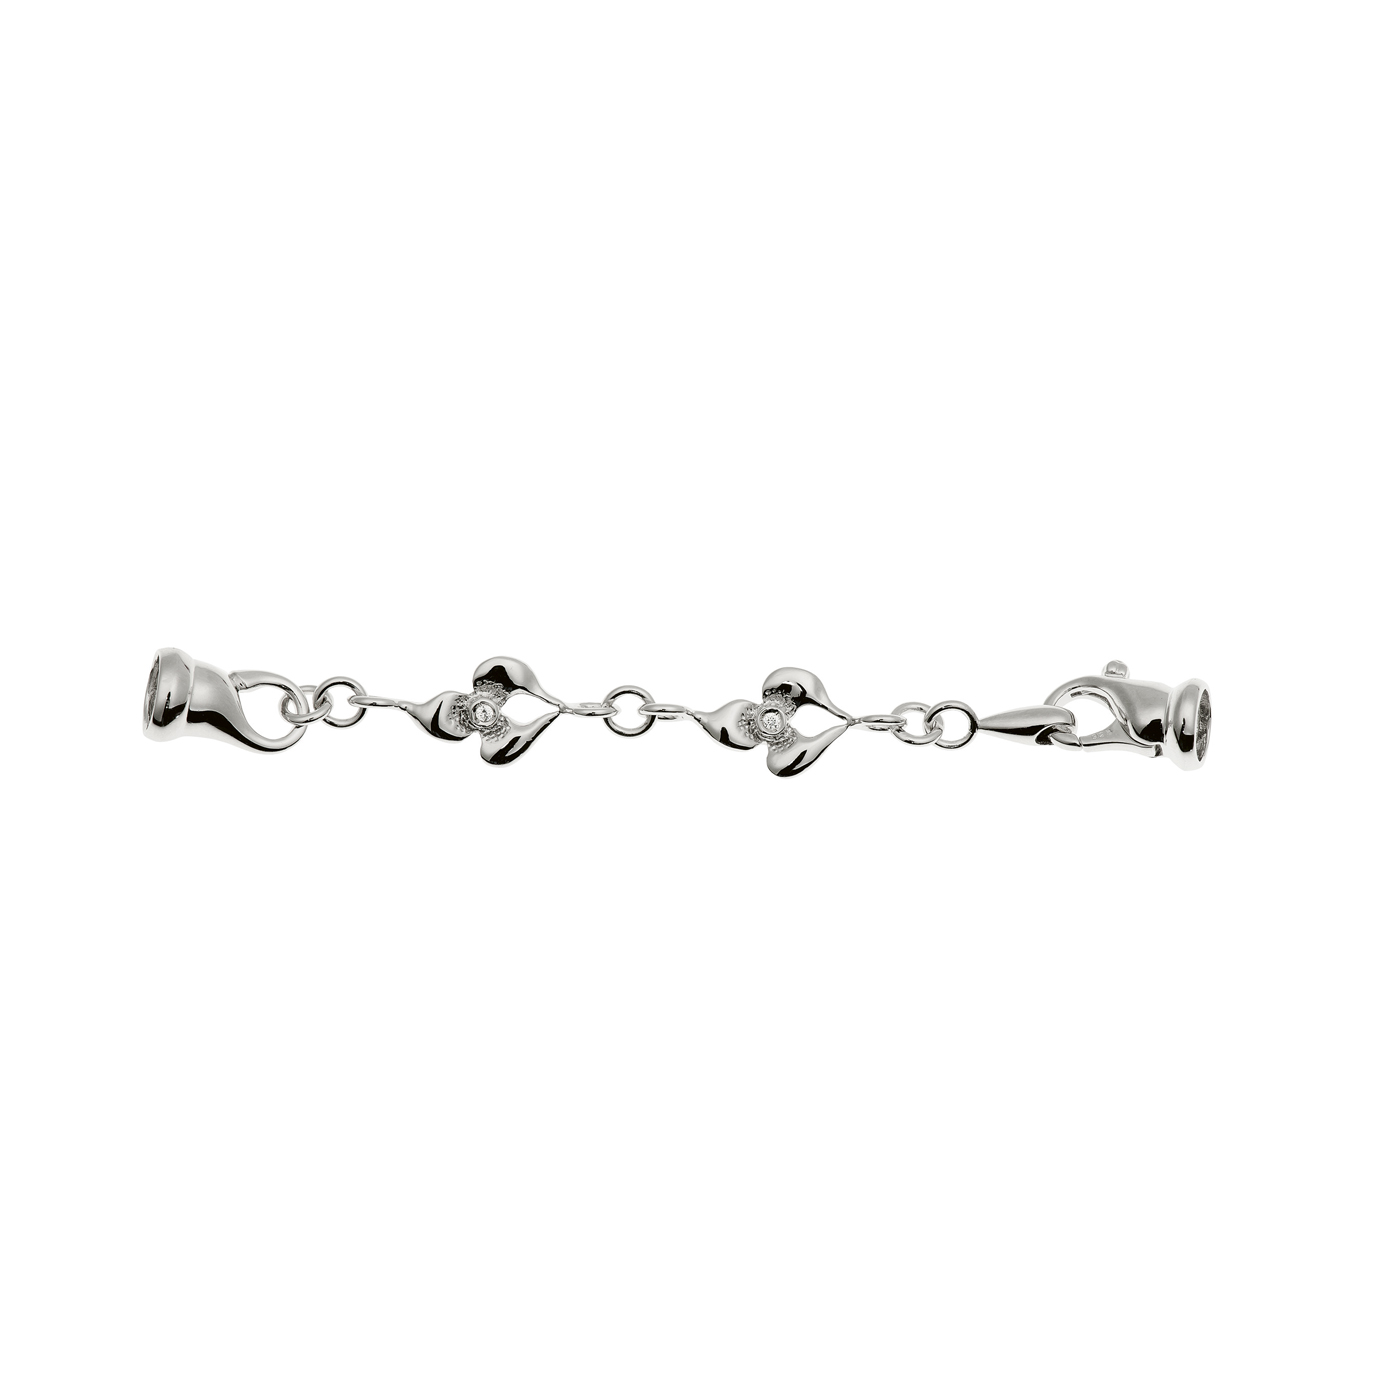 Elongation Chain, 925Ag Rhodium-Plated, 77 mm, Floral - 1 piece